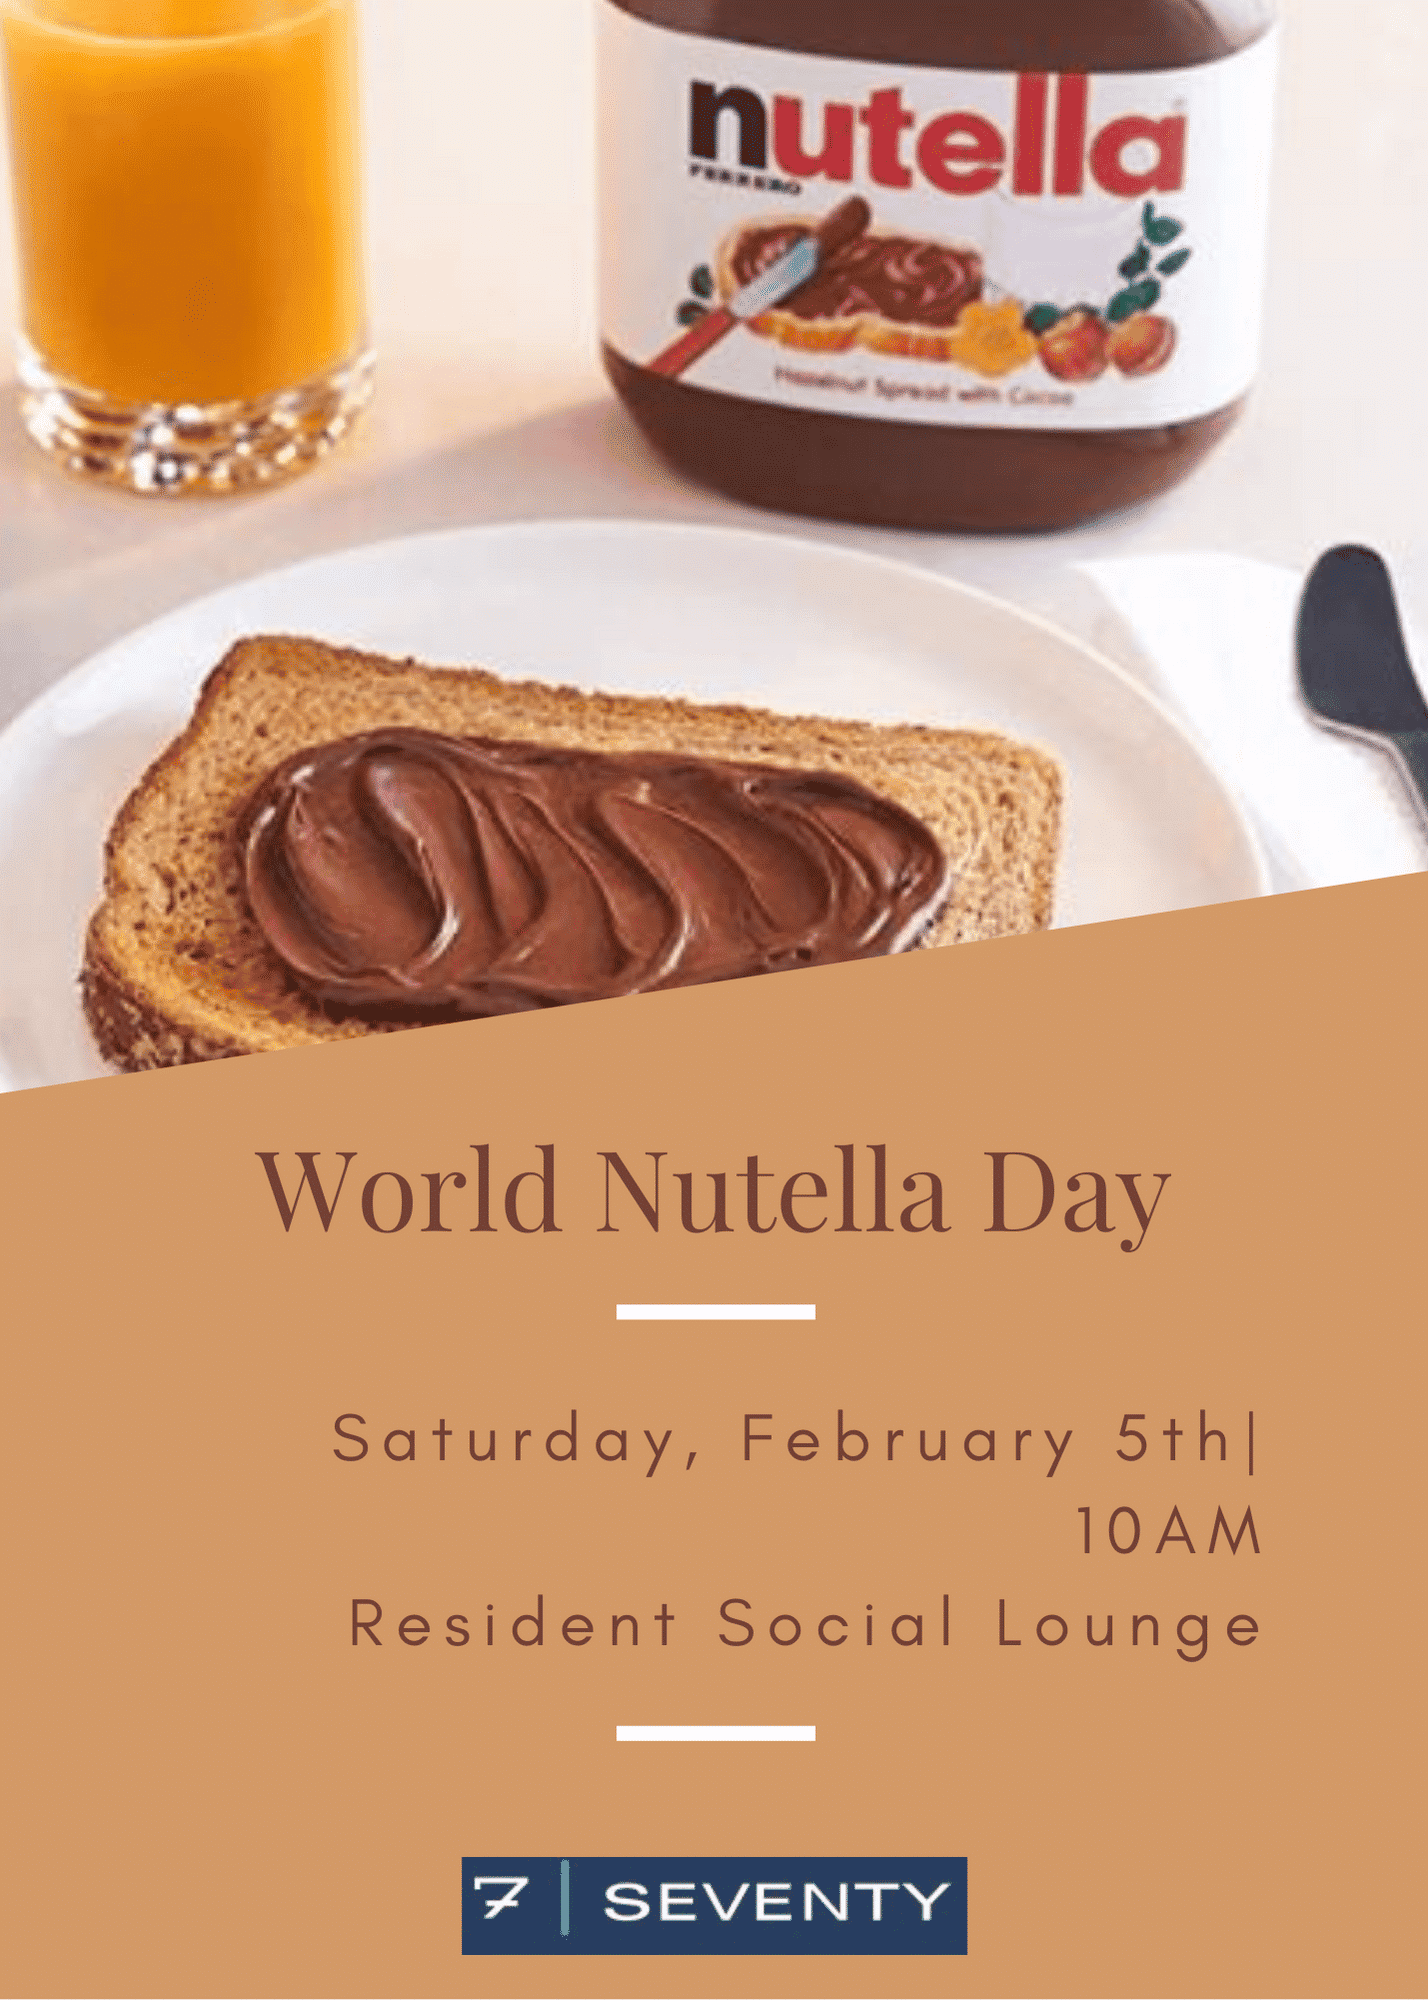 Apartments in Houston’s Energy Corridor Celebrate World Nutella Day with delicious nutella treats at Apartments in Houston's Energy Corridor.